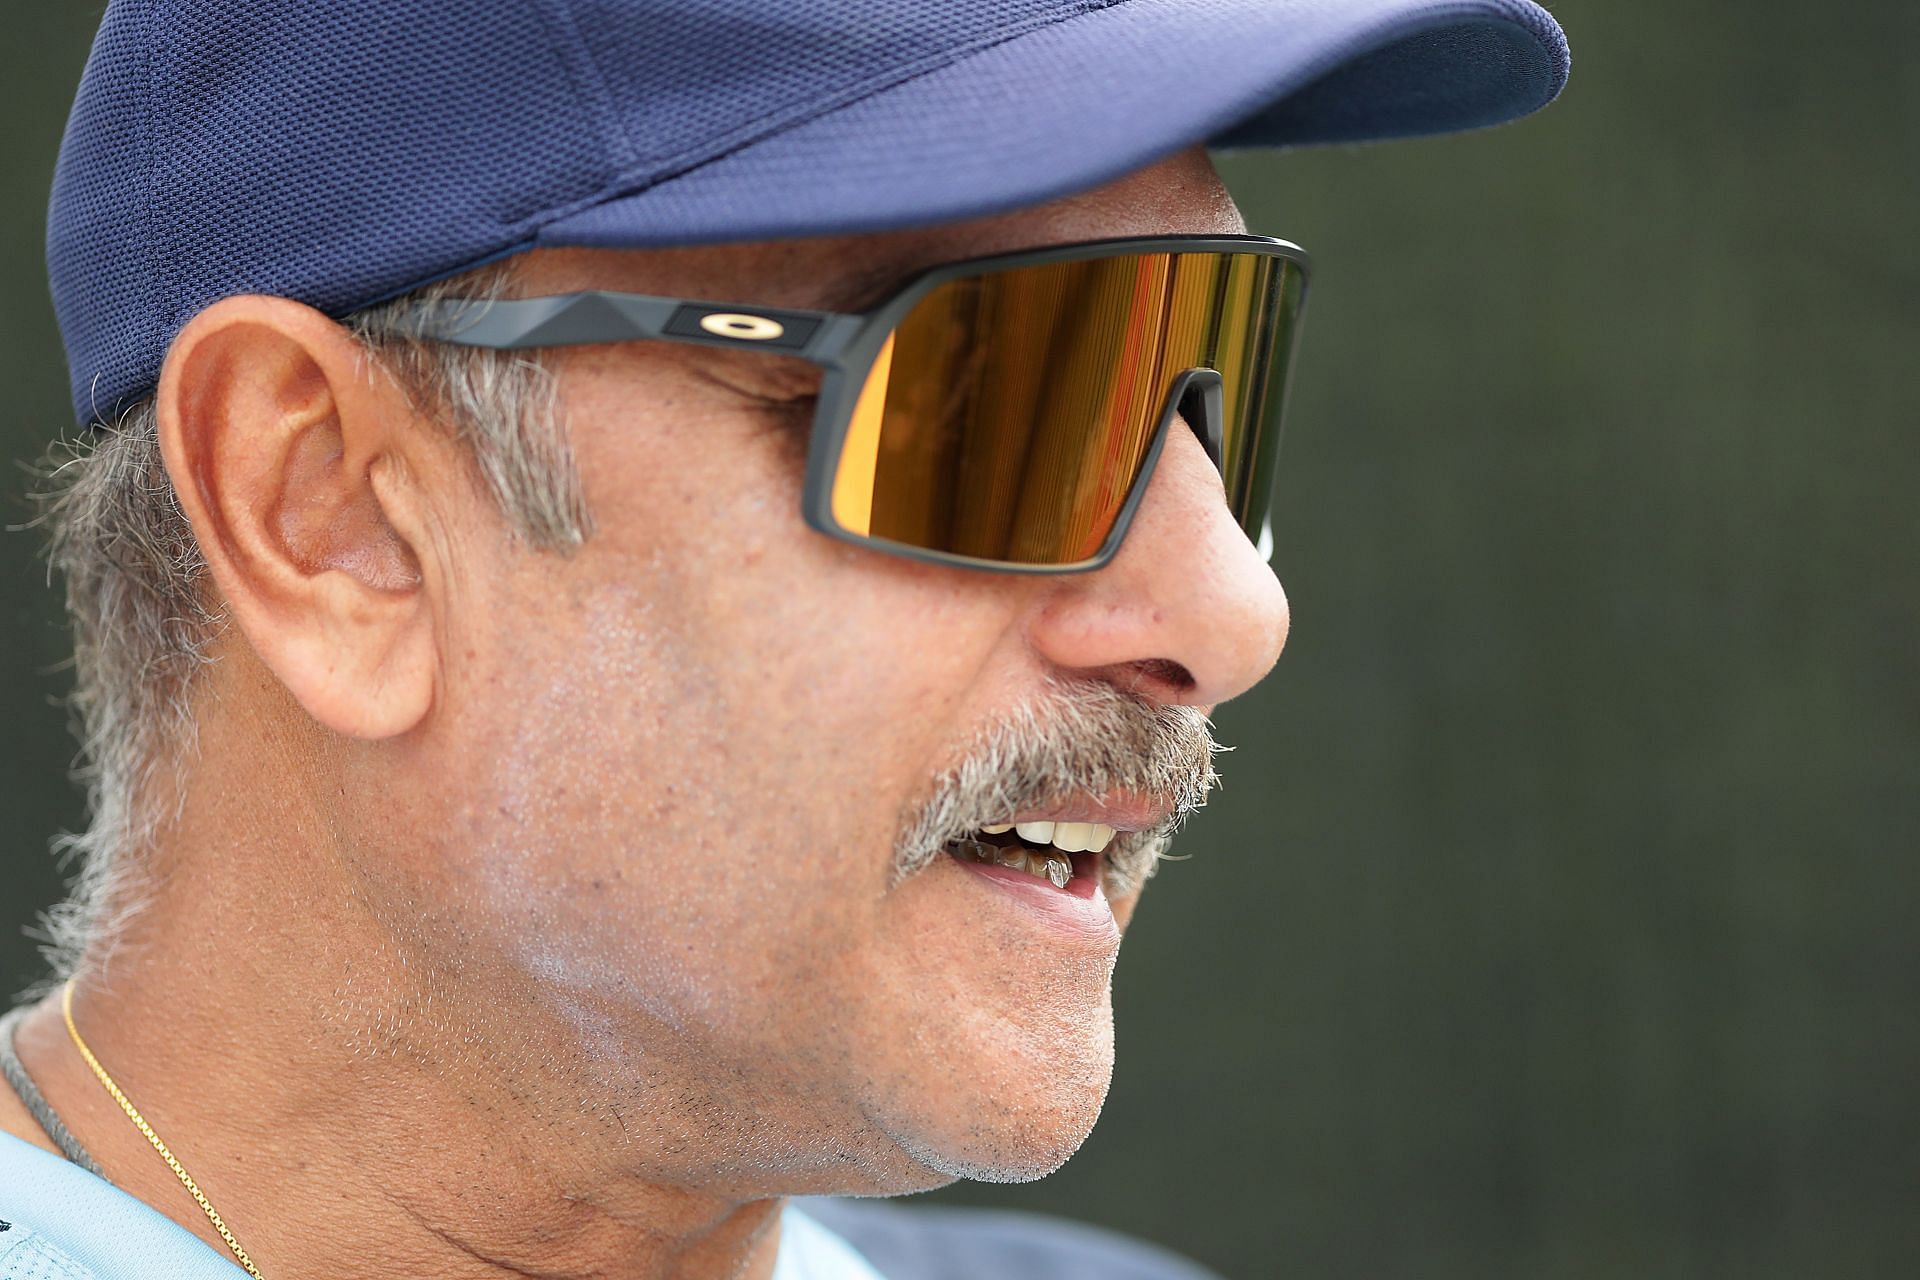 Ravi Shastri feels that cash-rich IPL teams could be expanded [Pic credits: Getty]